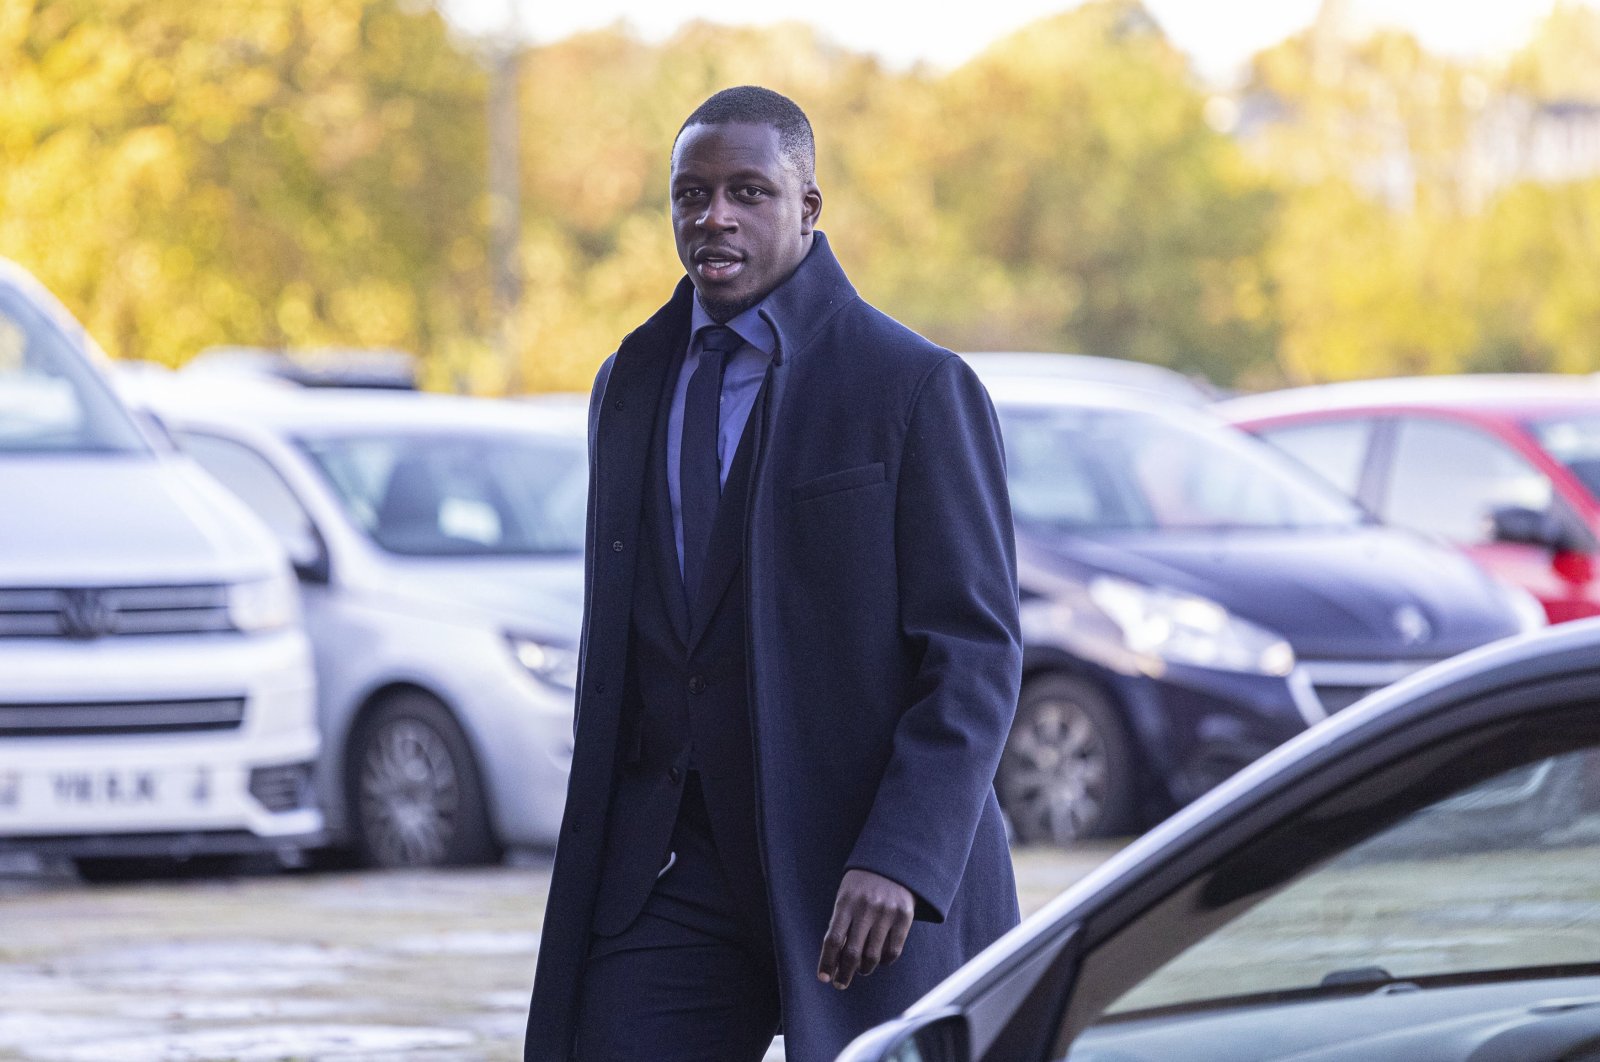 Manchester City footballer Benjamin Mendy arrives at Chester Crown Court, Chester, England, Oct. 17, 2022. (AP Photo)